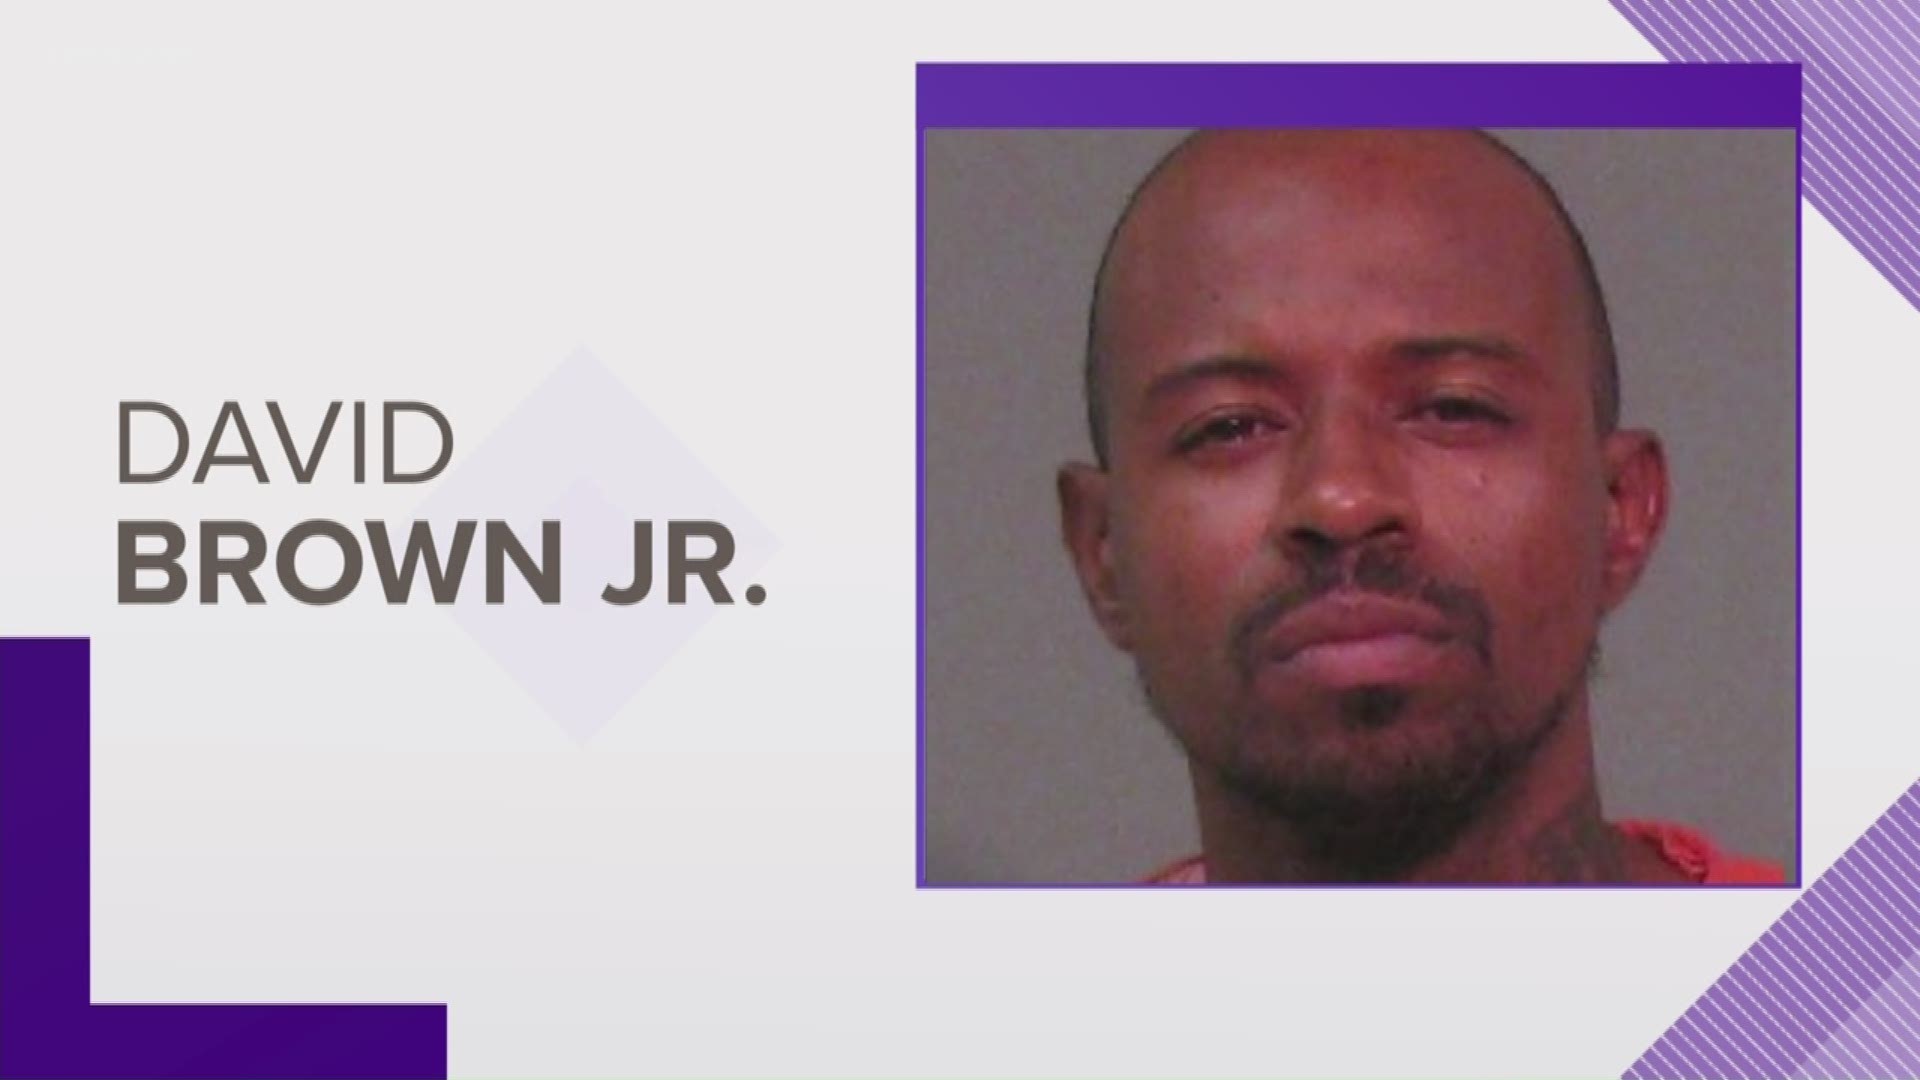 32-year-old David Brown Jr. is charged with armed robbery, criminal conspiracy and possession of a weapon during a violent crime after he advertised to sell an iPhone on the app "OfferUp" then produced a pistol at the exchange, according to police.